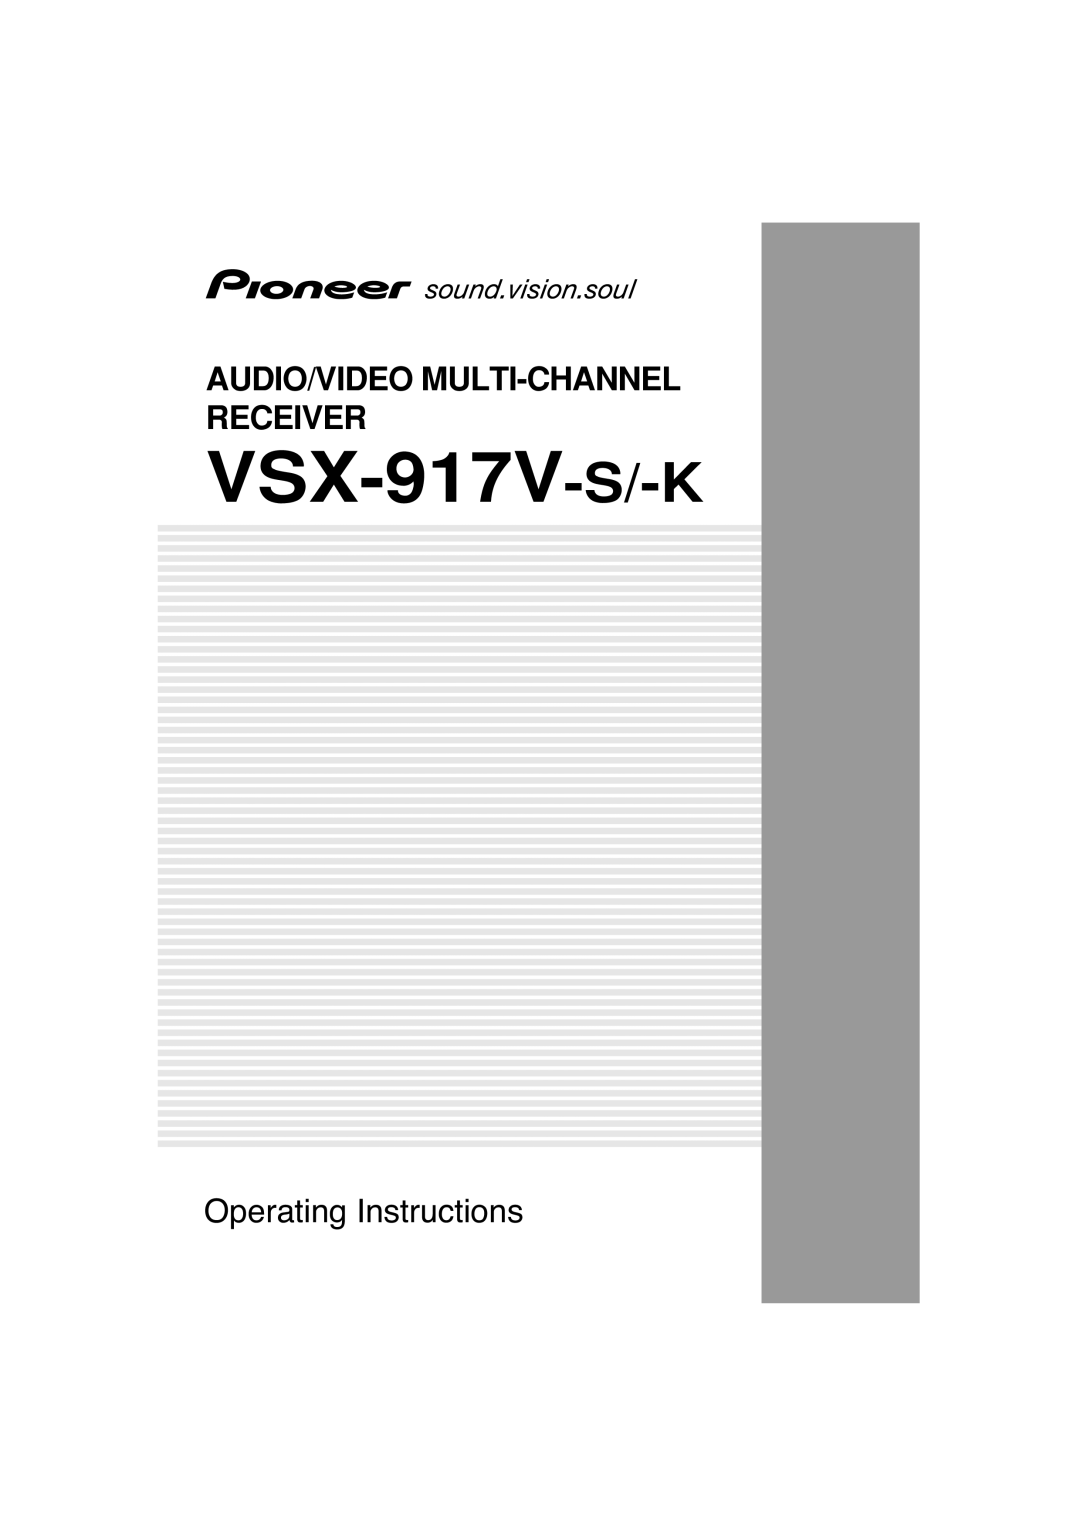 Pioneer VSX-917V-S/-K manual Audio/Video Multi-Channel Receiver, Operating Instructions 